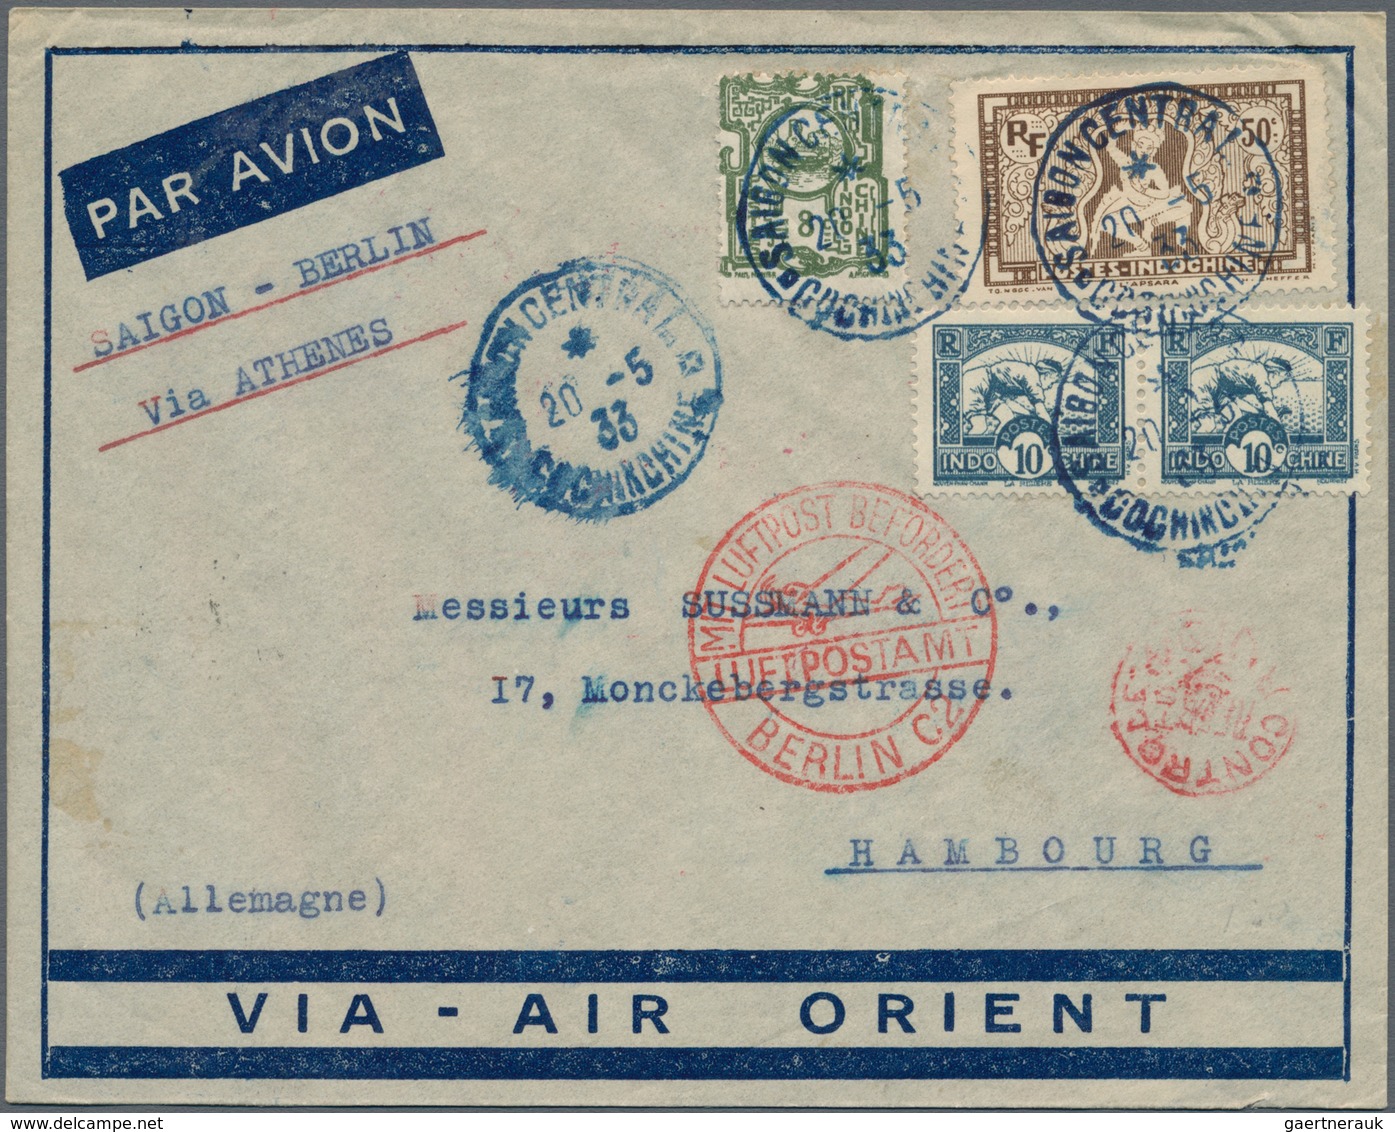 Französisch-Indochina: 1931/40, air mail covers by Air Orient / Air France (26 inc. two airletters,